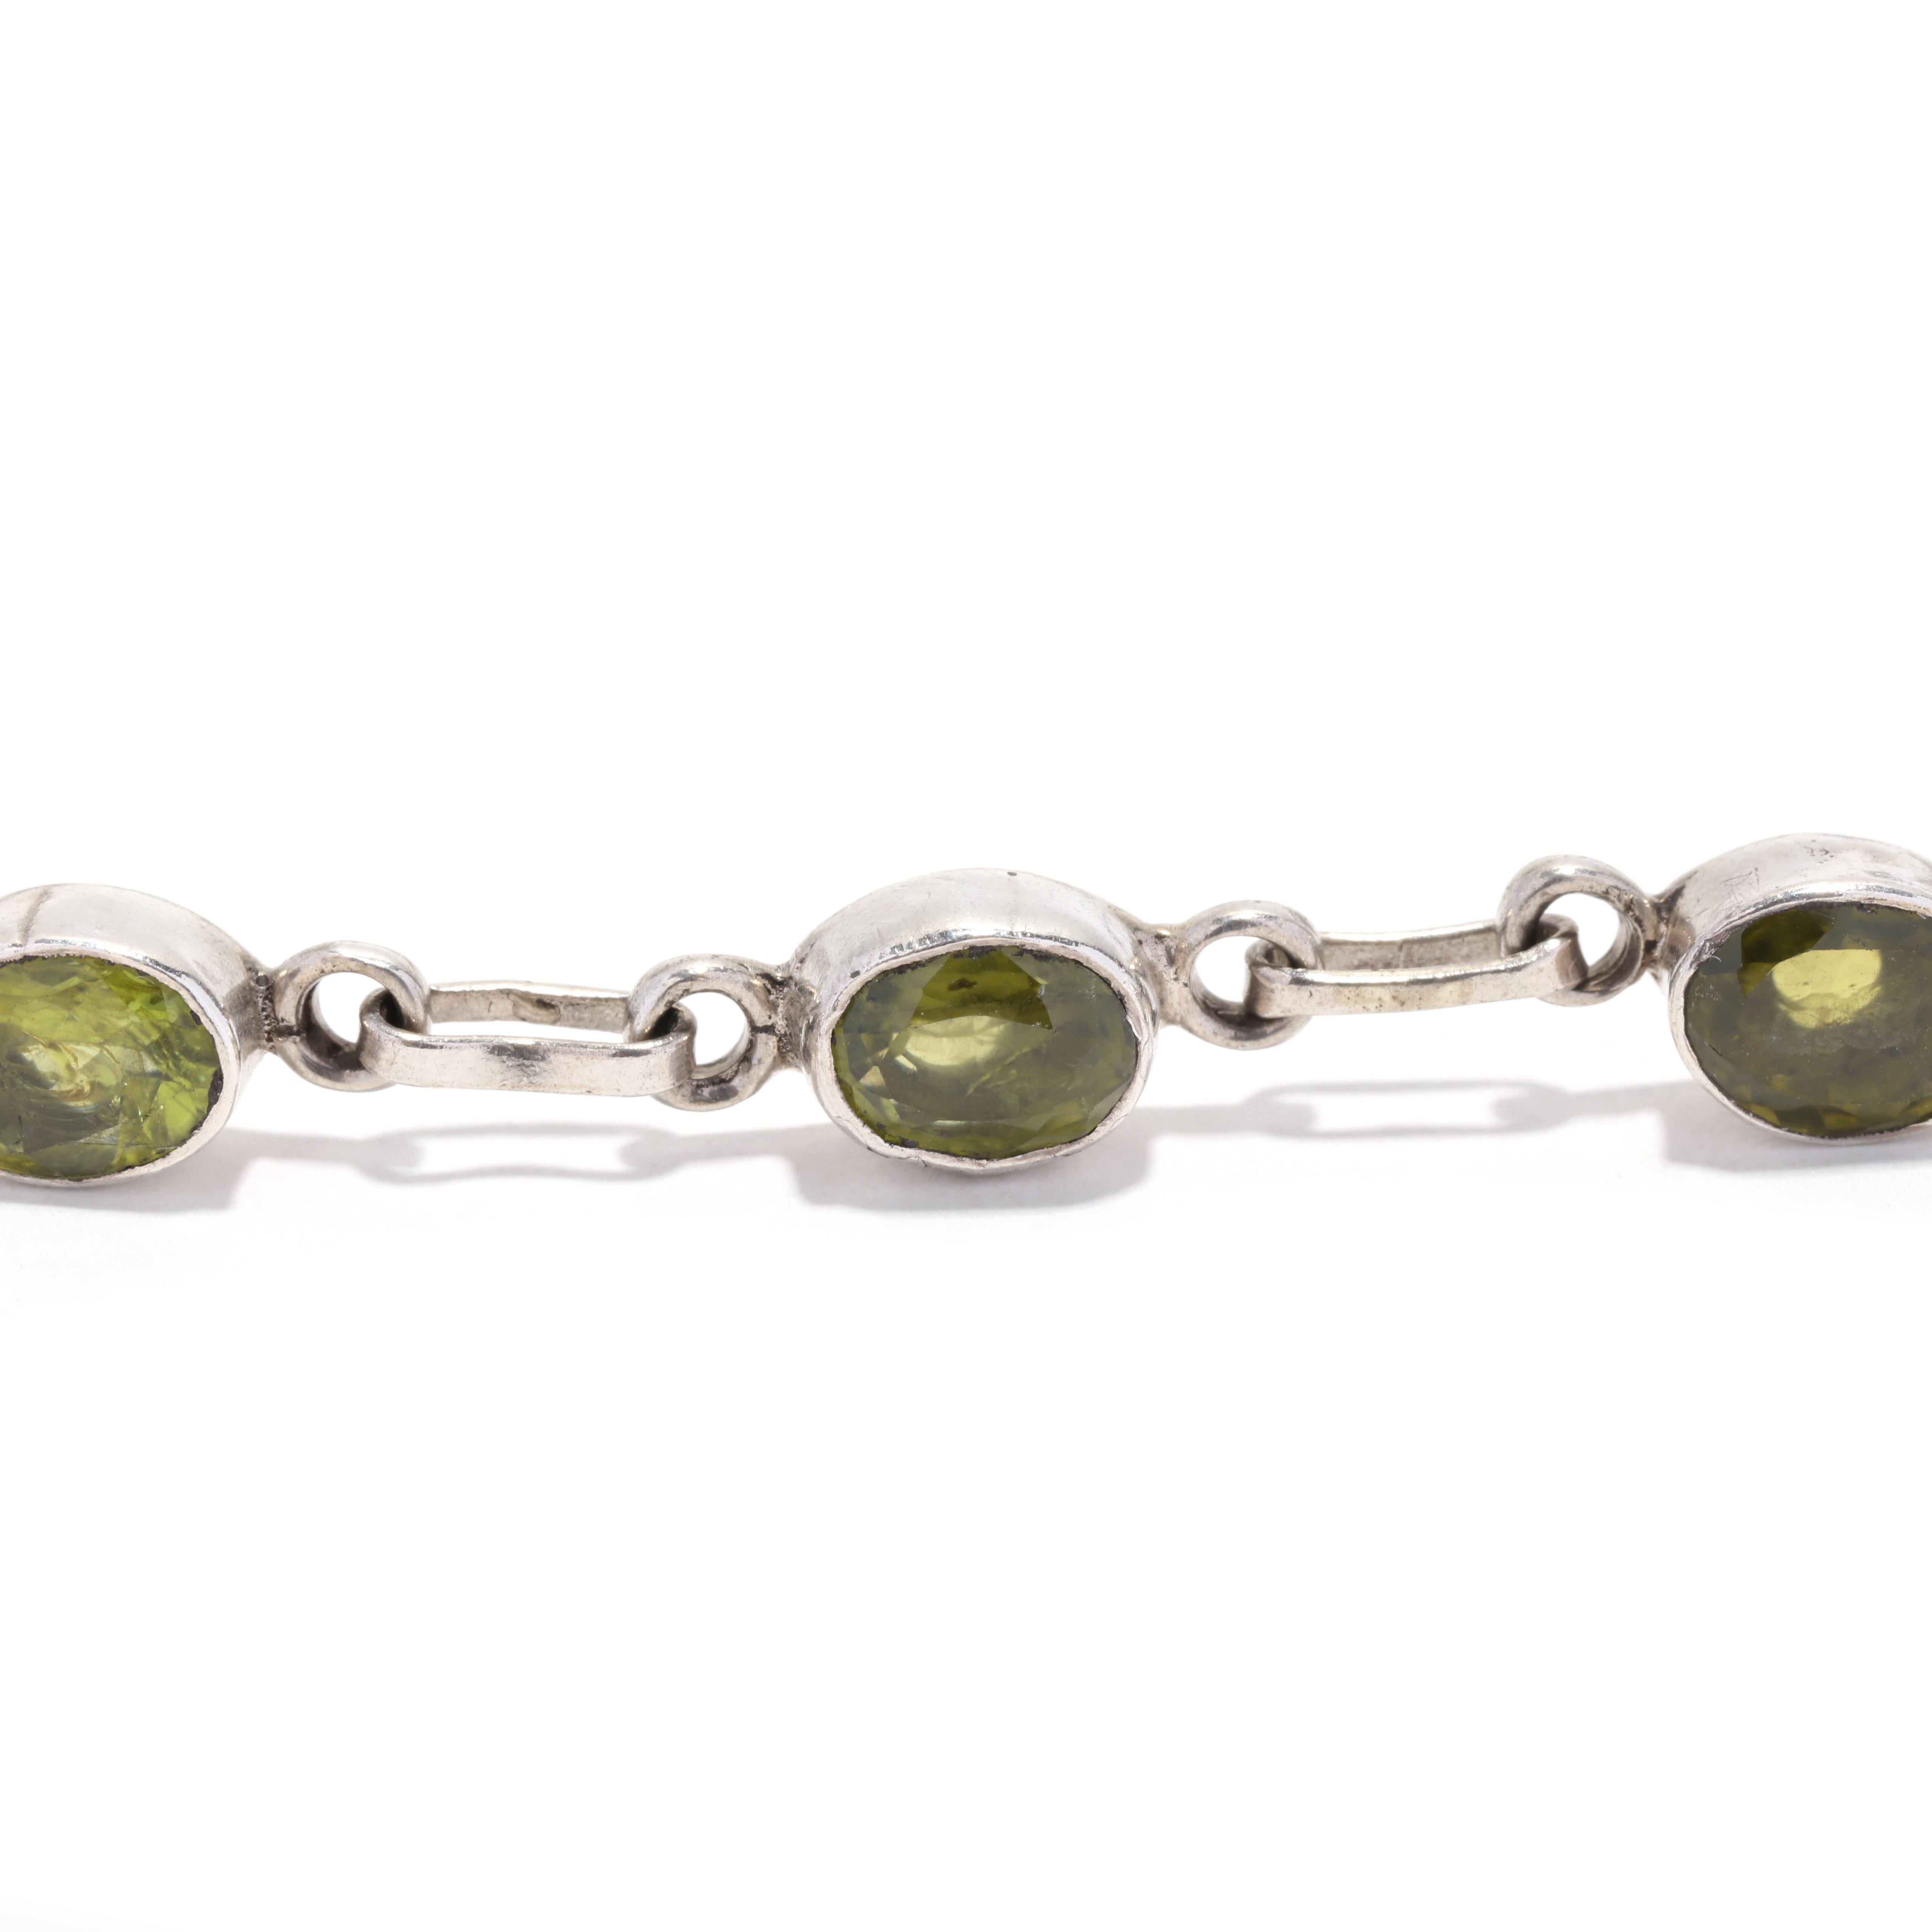 This stunning August birthstone bracelet is perfect for the special lady in your life. Crafted from sterling silver and featuring 12ctw of bezel set peridot stones, this beautiful bracelet is 8.75 inches long and is sure to become a family heirloom.